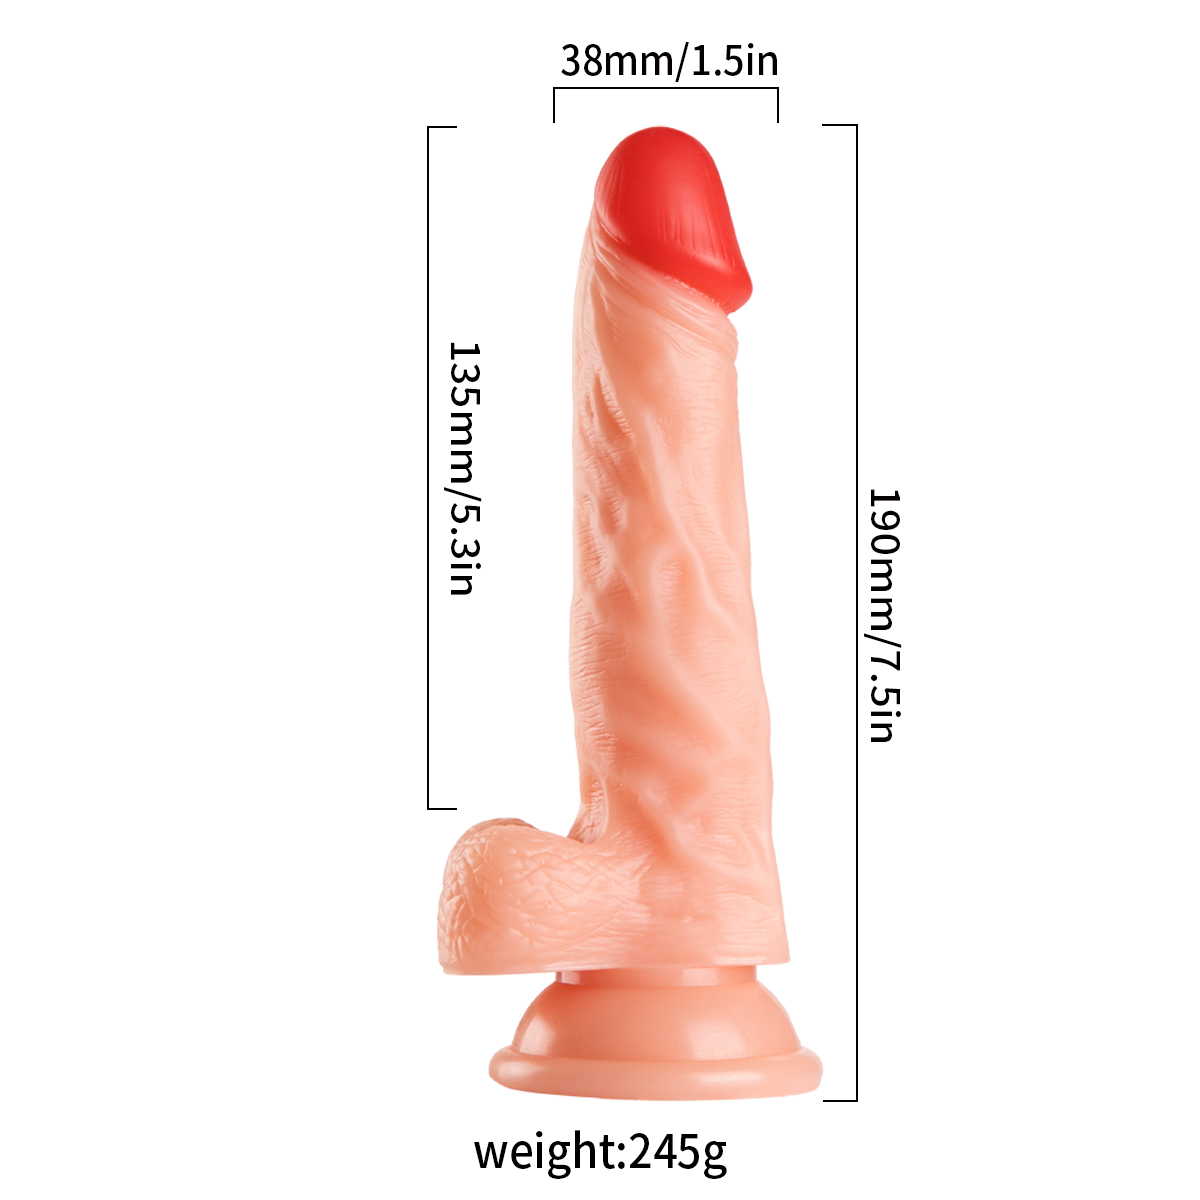 Flexible Lifelike Sex Toys Realistic Dildos for Women with Strong Suction Cup for Hands-Free